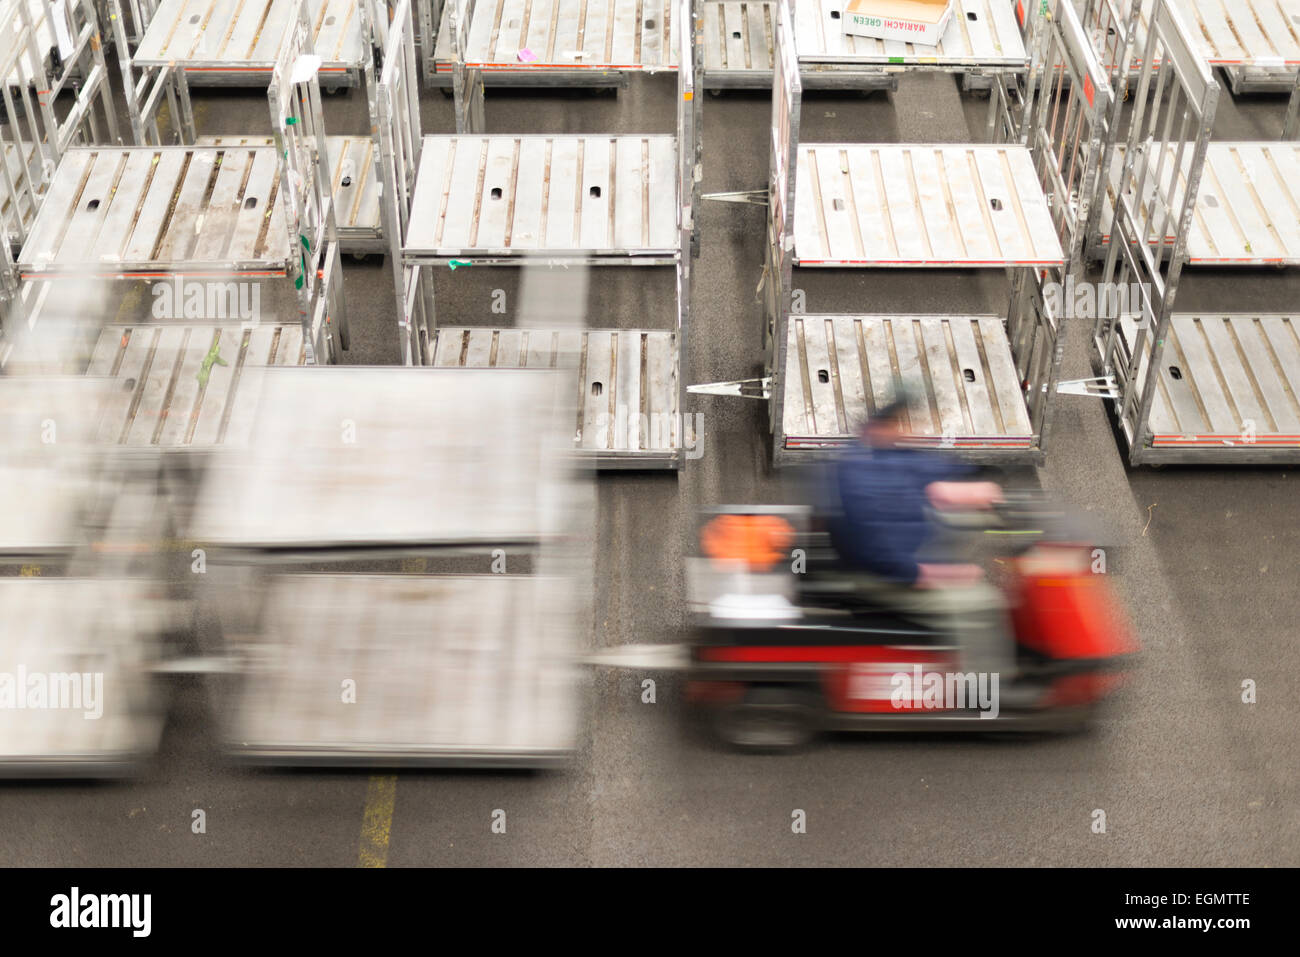 A worker moves pallets and trolleys around at the Aalsmeer Flora Holland flower auction warehouse Amsterdam with motion blur Stock Photo